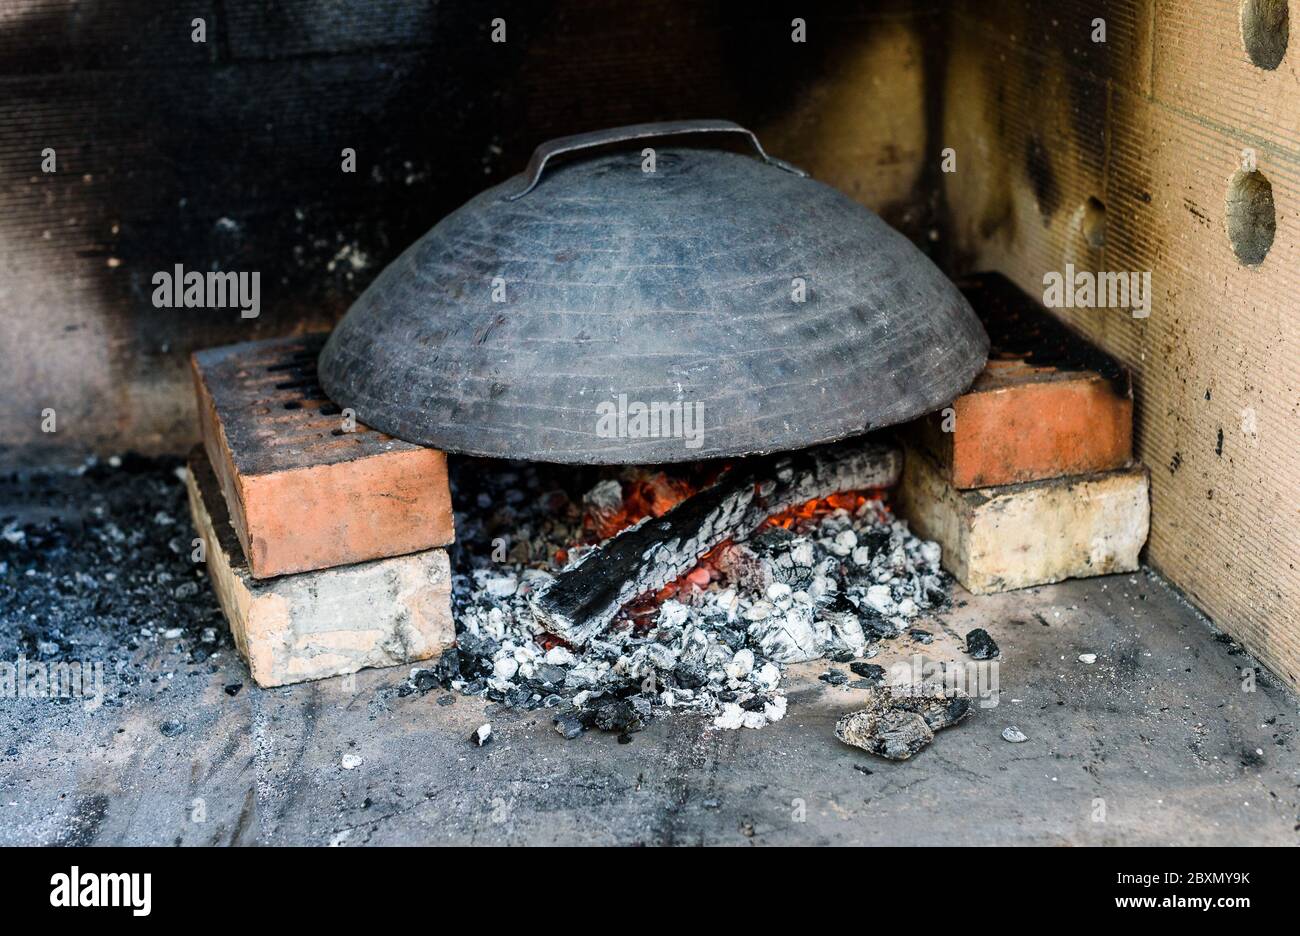 Making of homemade Italian pizza in fireplace brick oven. Making of traditional pizza in stone brick fireplace with fire wood and coals.Heating up a m Stock Photo